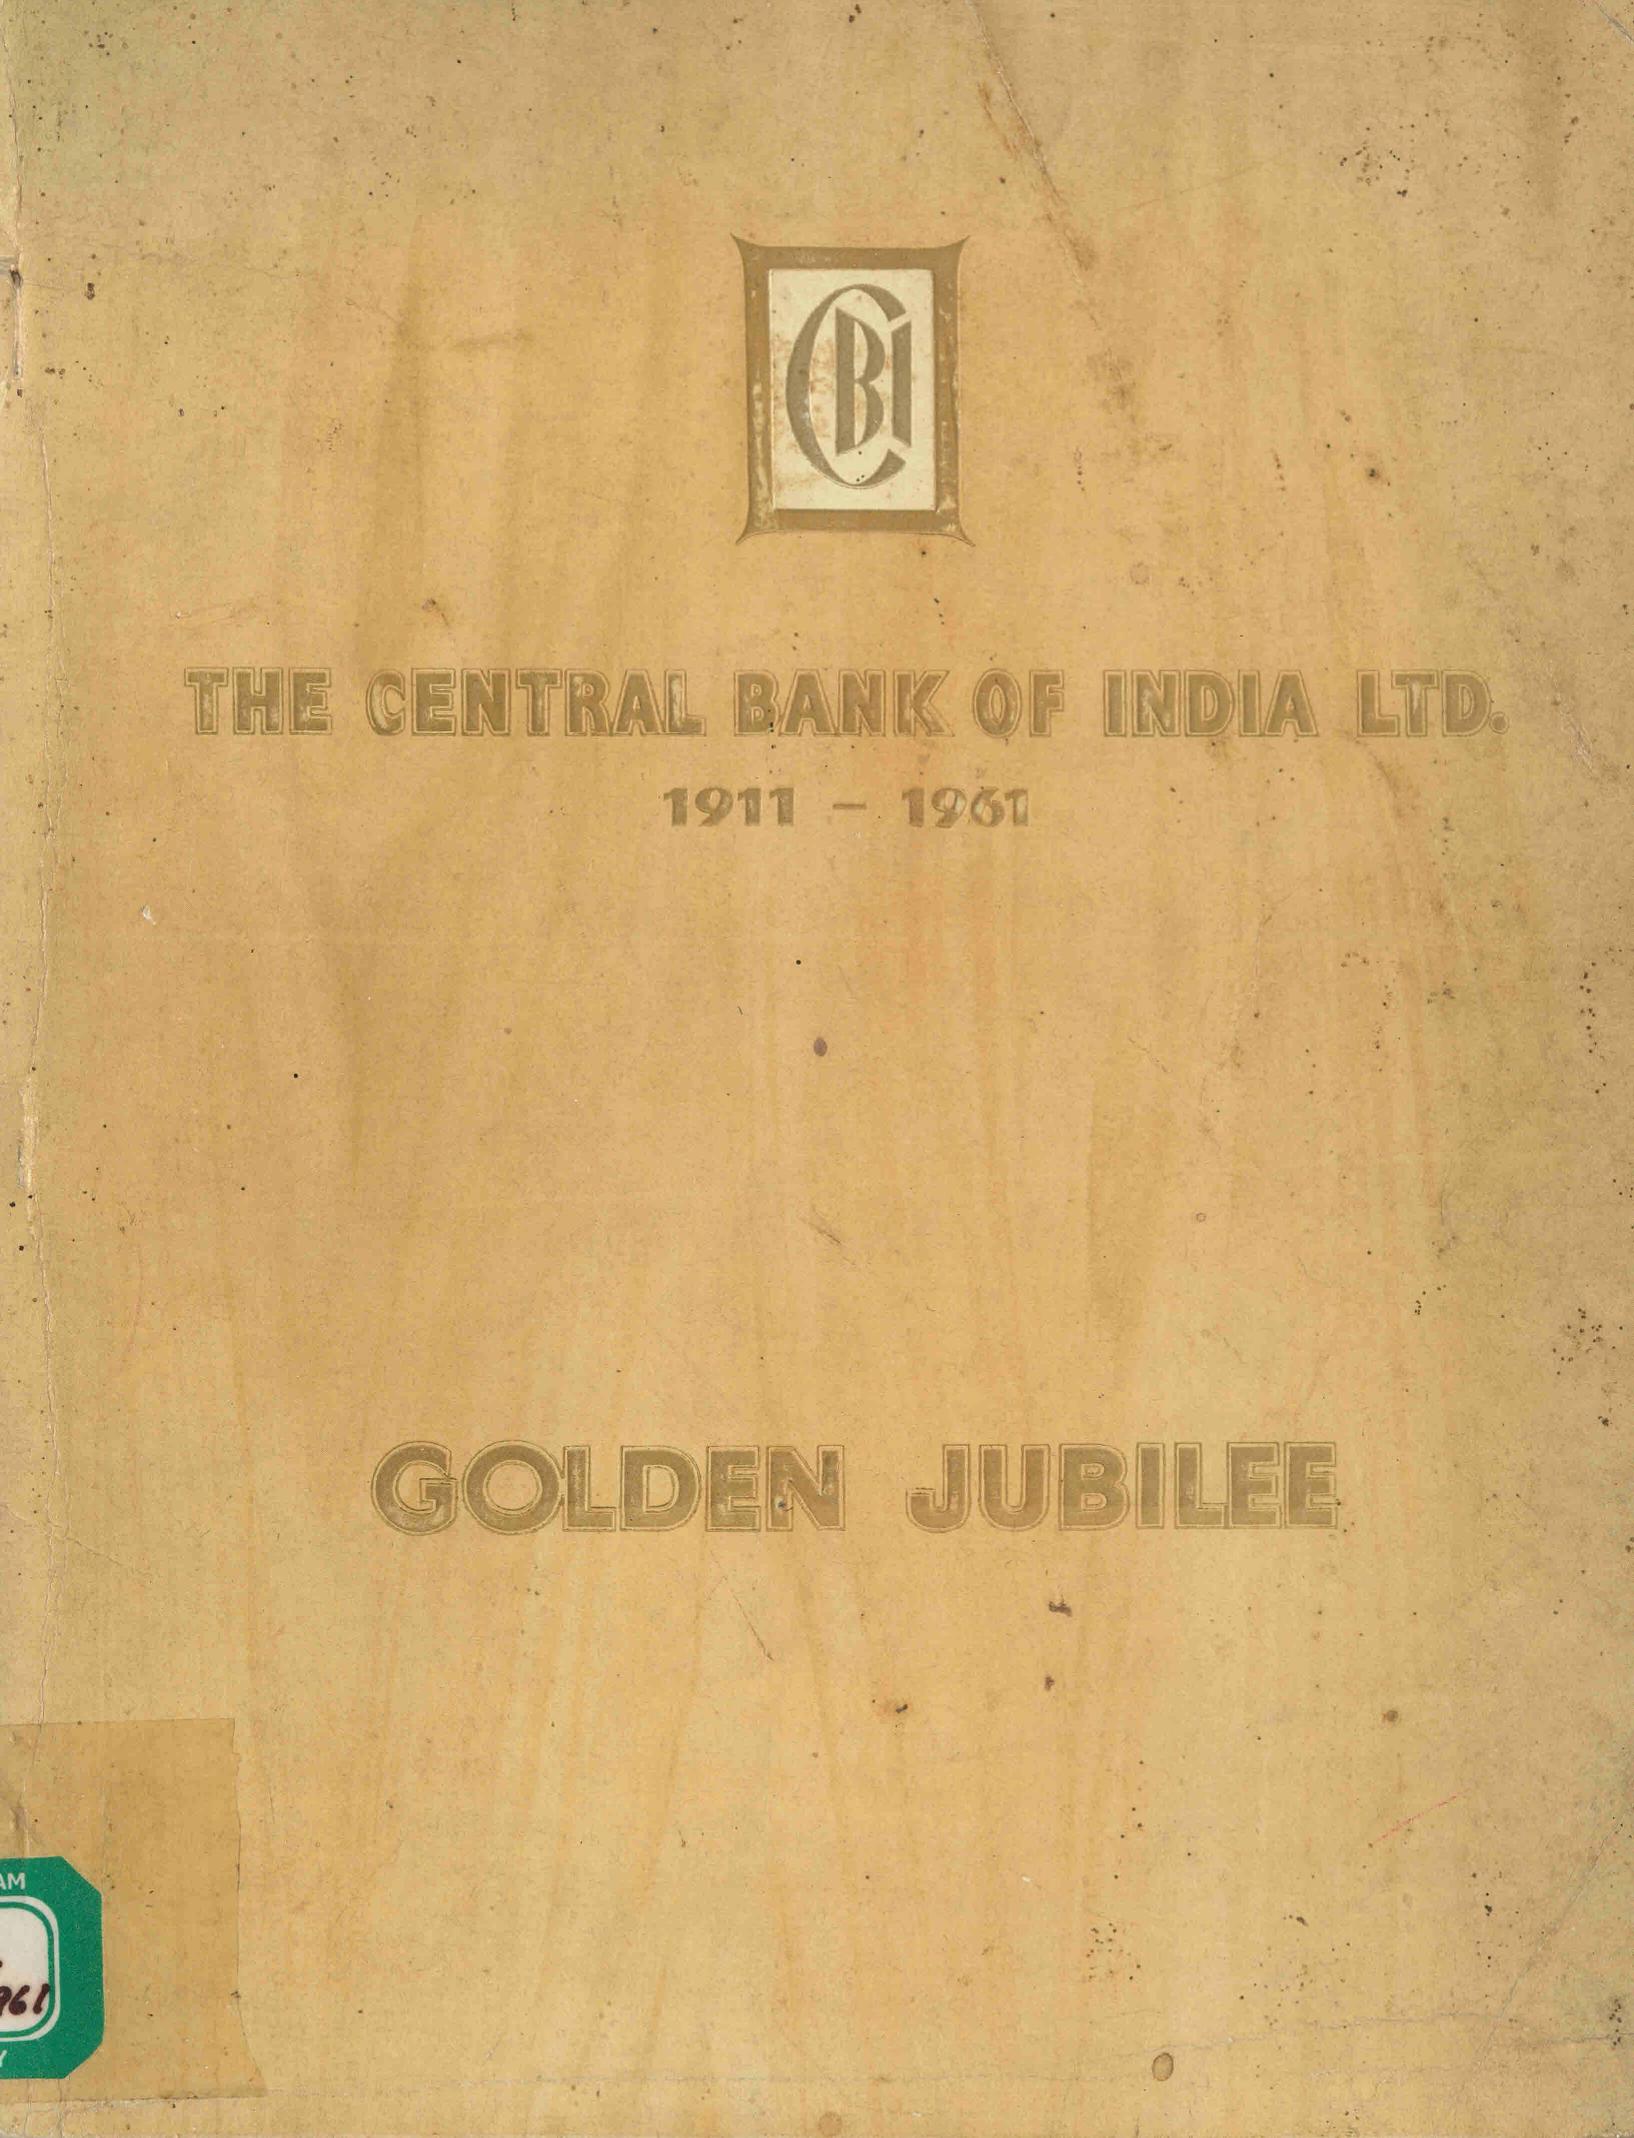 1961 - Central Bank of India - Golden Jubilee